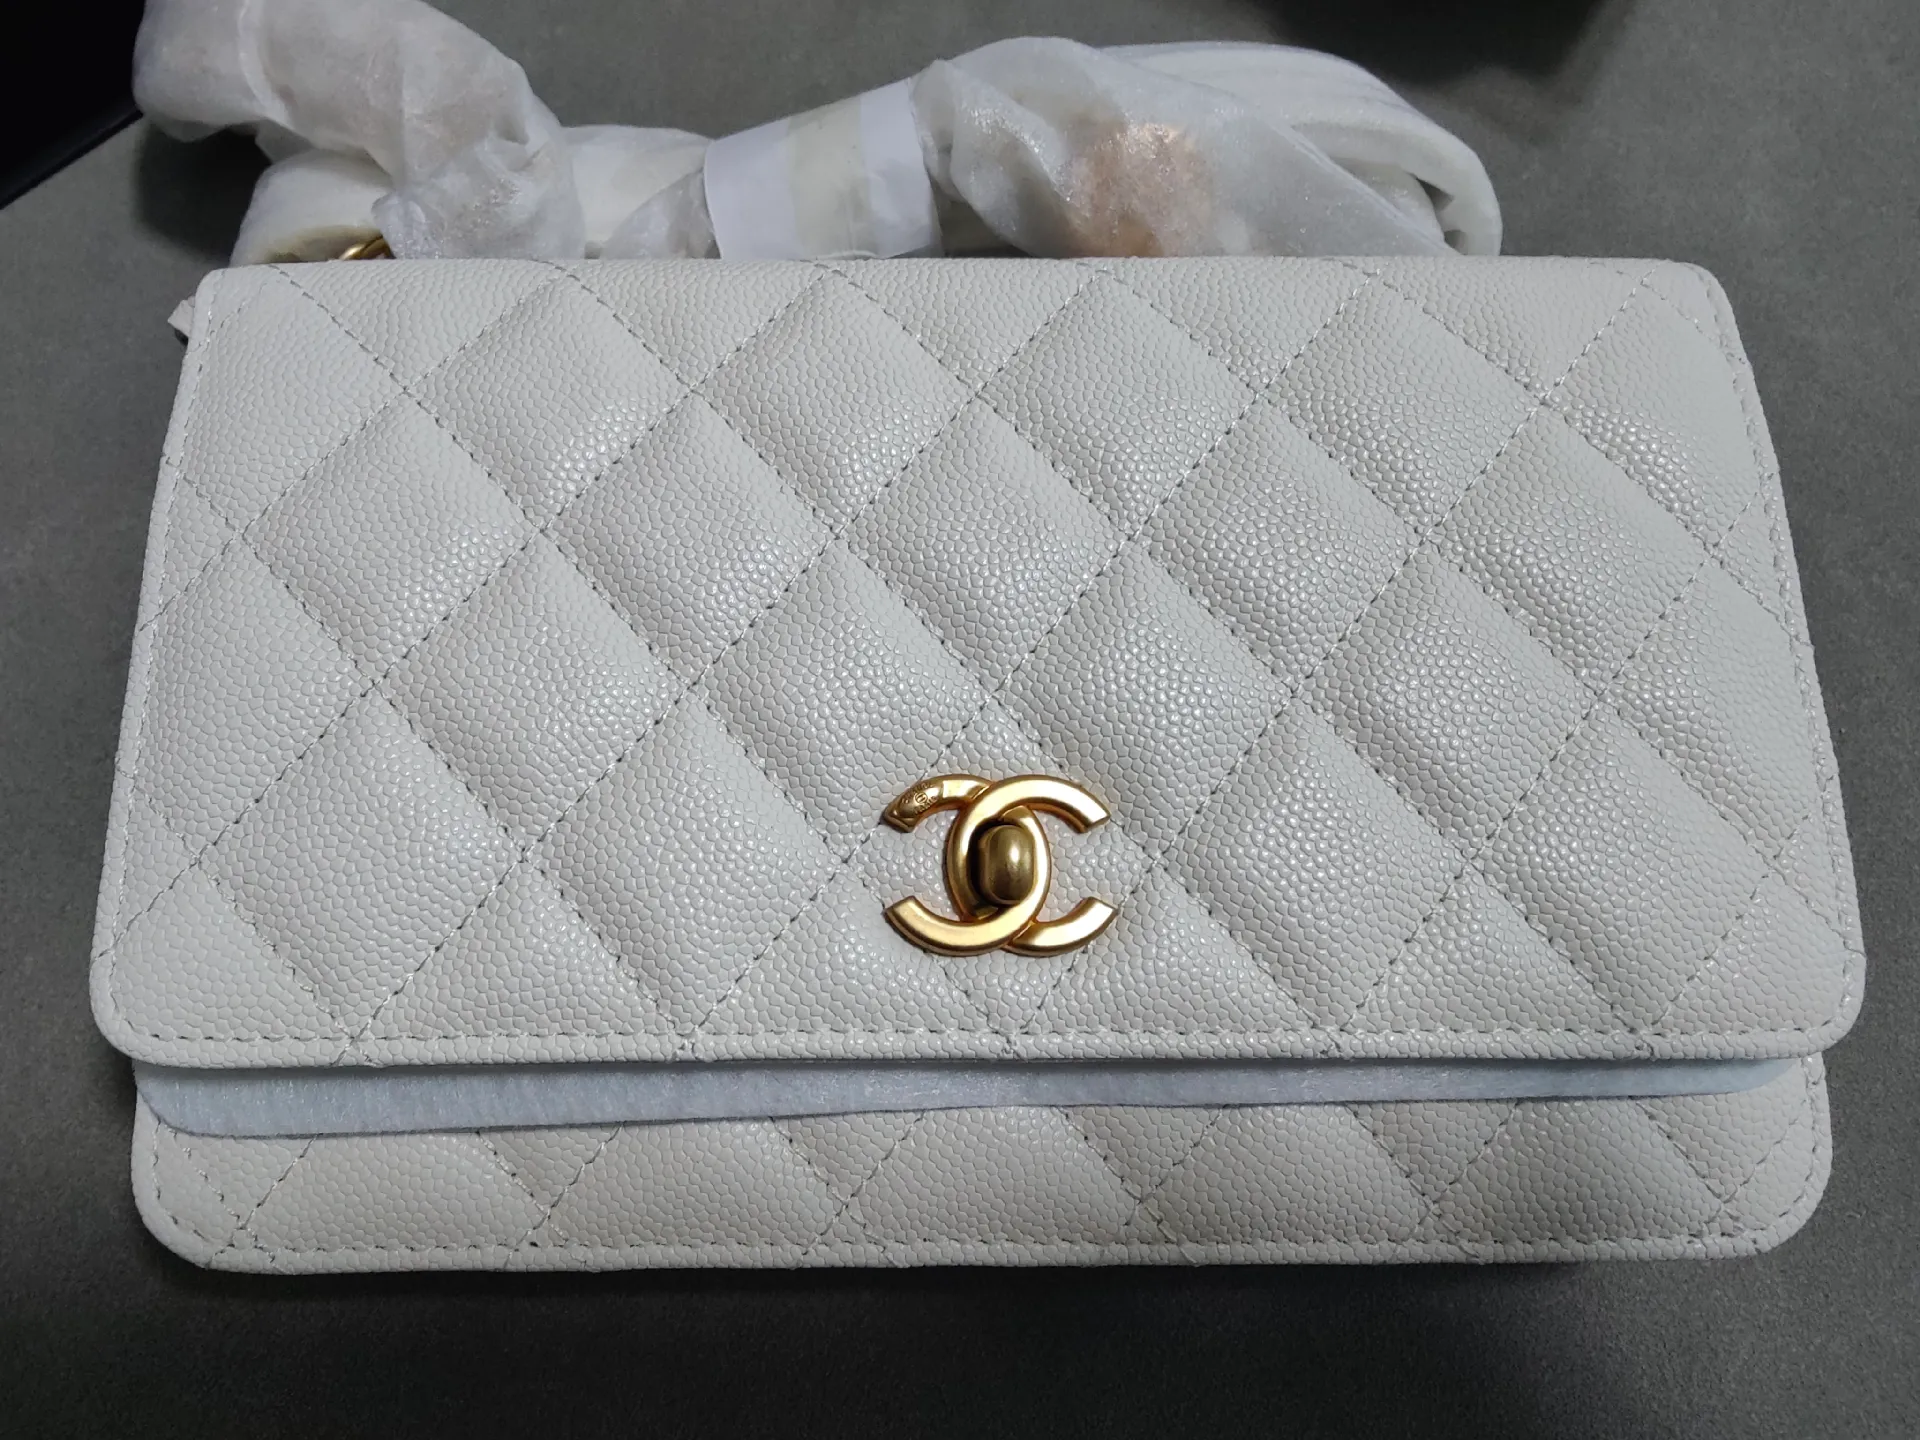 Vintage Chanel Kelly Review, Gallery posted by aurelietutu